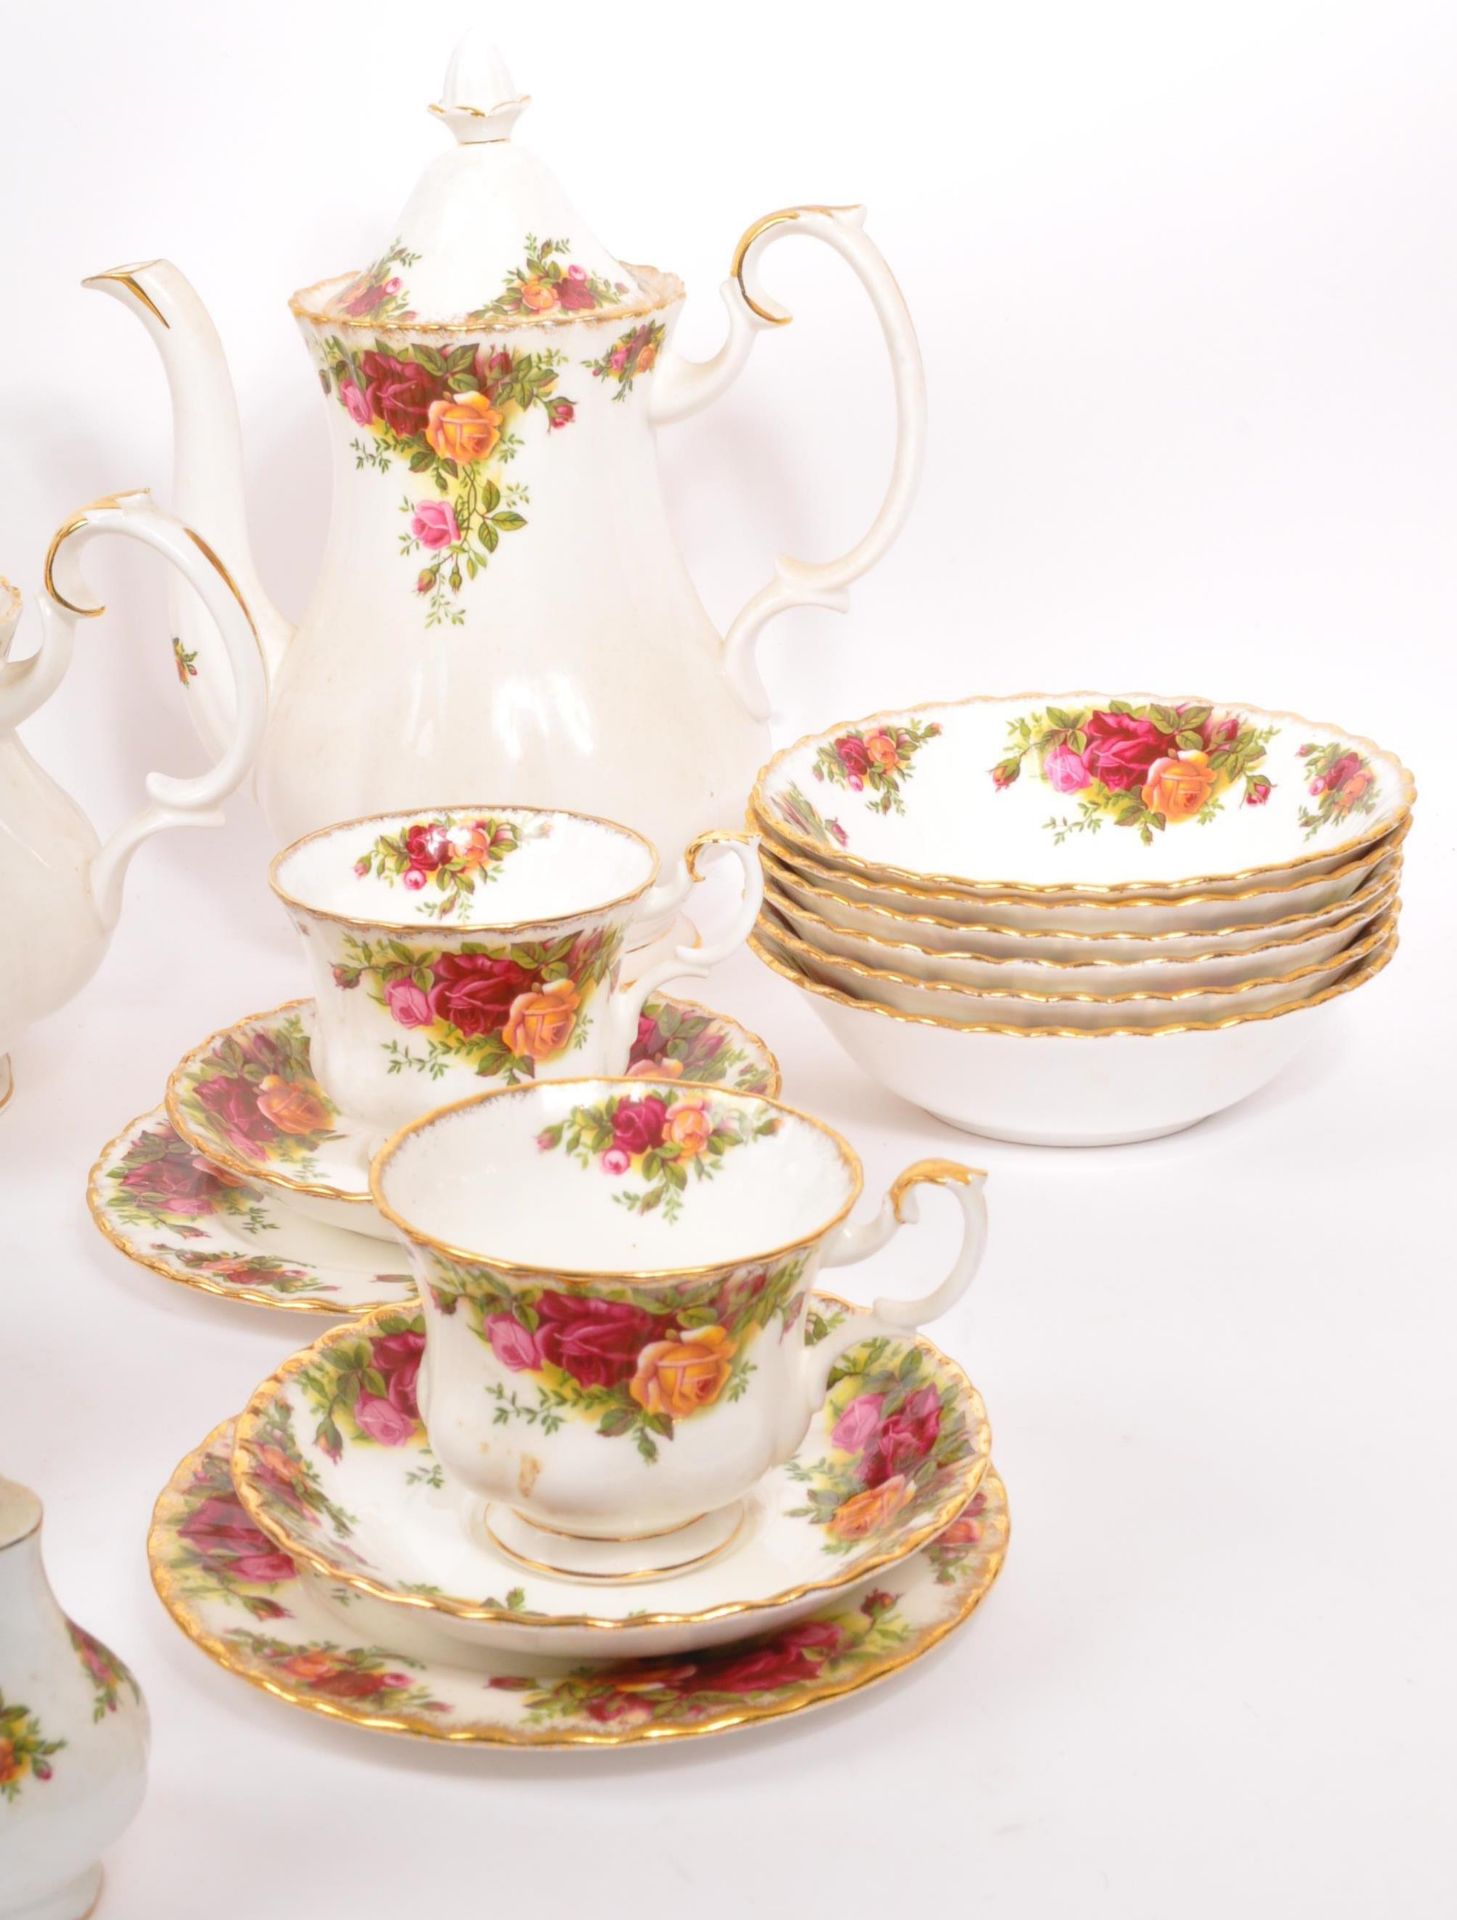 ROYAL ALBERT OLD COUNTRY ROSES TEA SERVICE - SET - Image 2 of 8